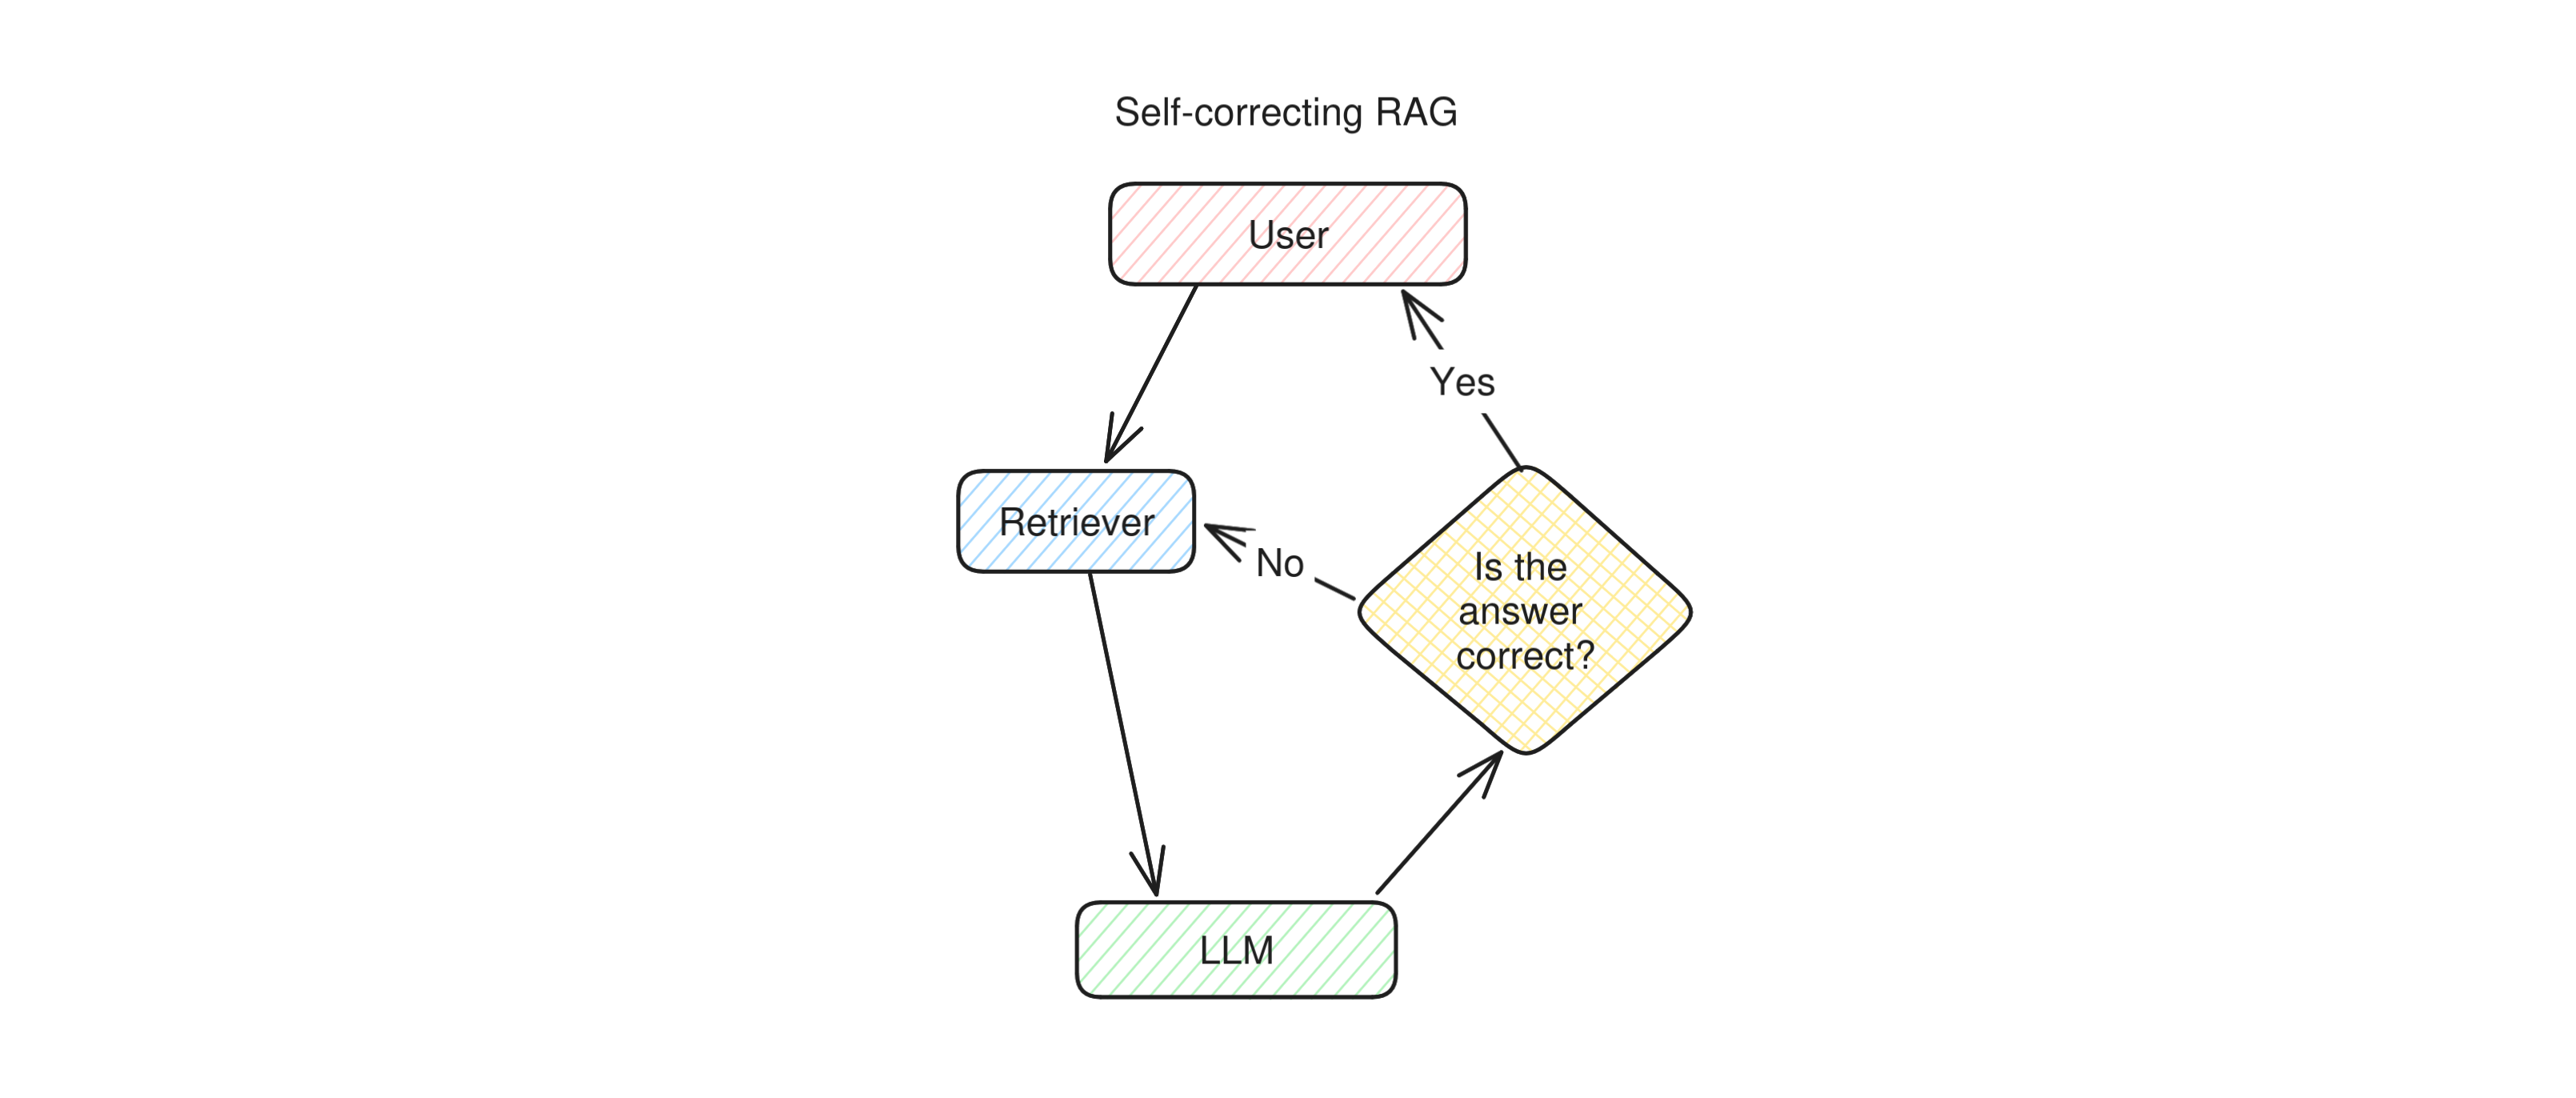 Diagram of the operation of self correcting RAG: when the user asks a question, the retriever is called and the results are sent to the LLM to extract an answer from. However, before returning the answer to the user, another LLM is asked to judge whether in their opinion, the answer is correct. If the second LLM agrees, the answer is sent to the user. If not, the second LLM generates a new question for the retriever and runs it again, or in other cases, it simply integrates its opinion in the prompt and runs the first LLM again.